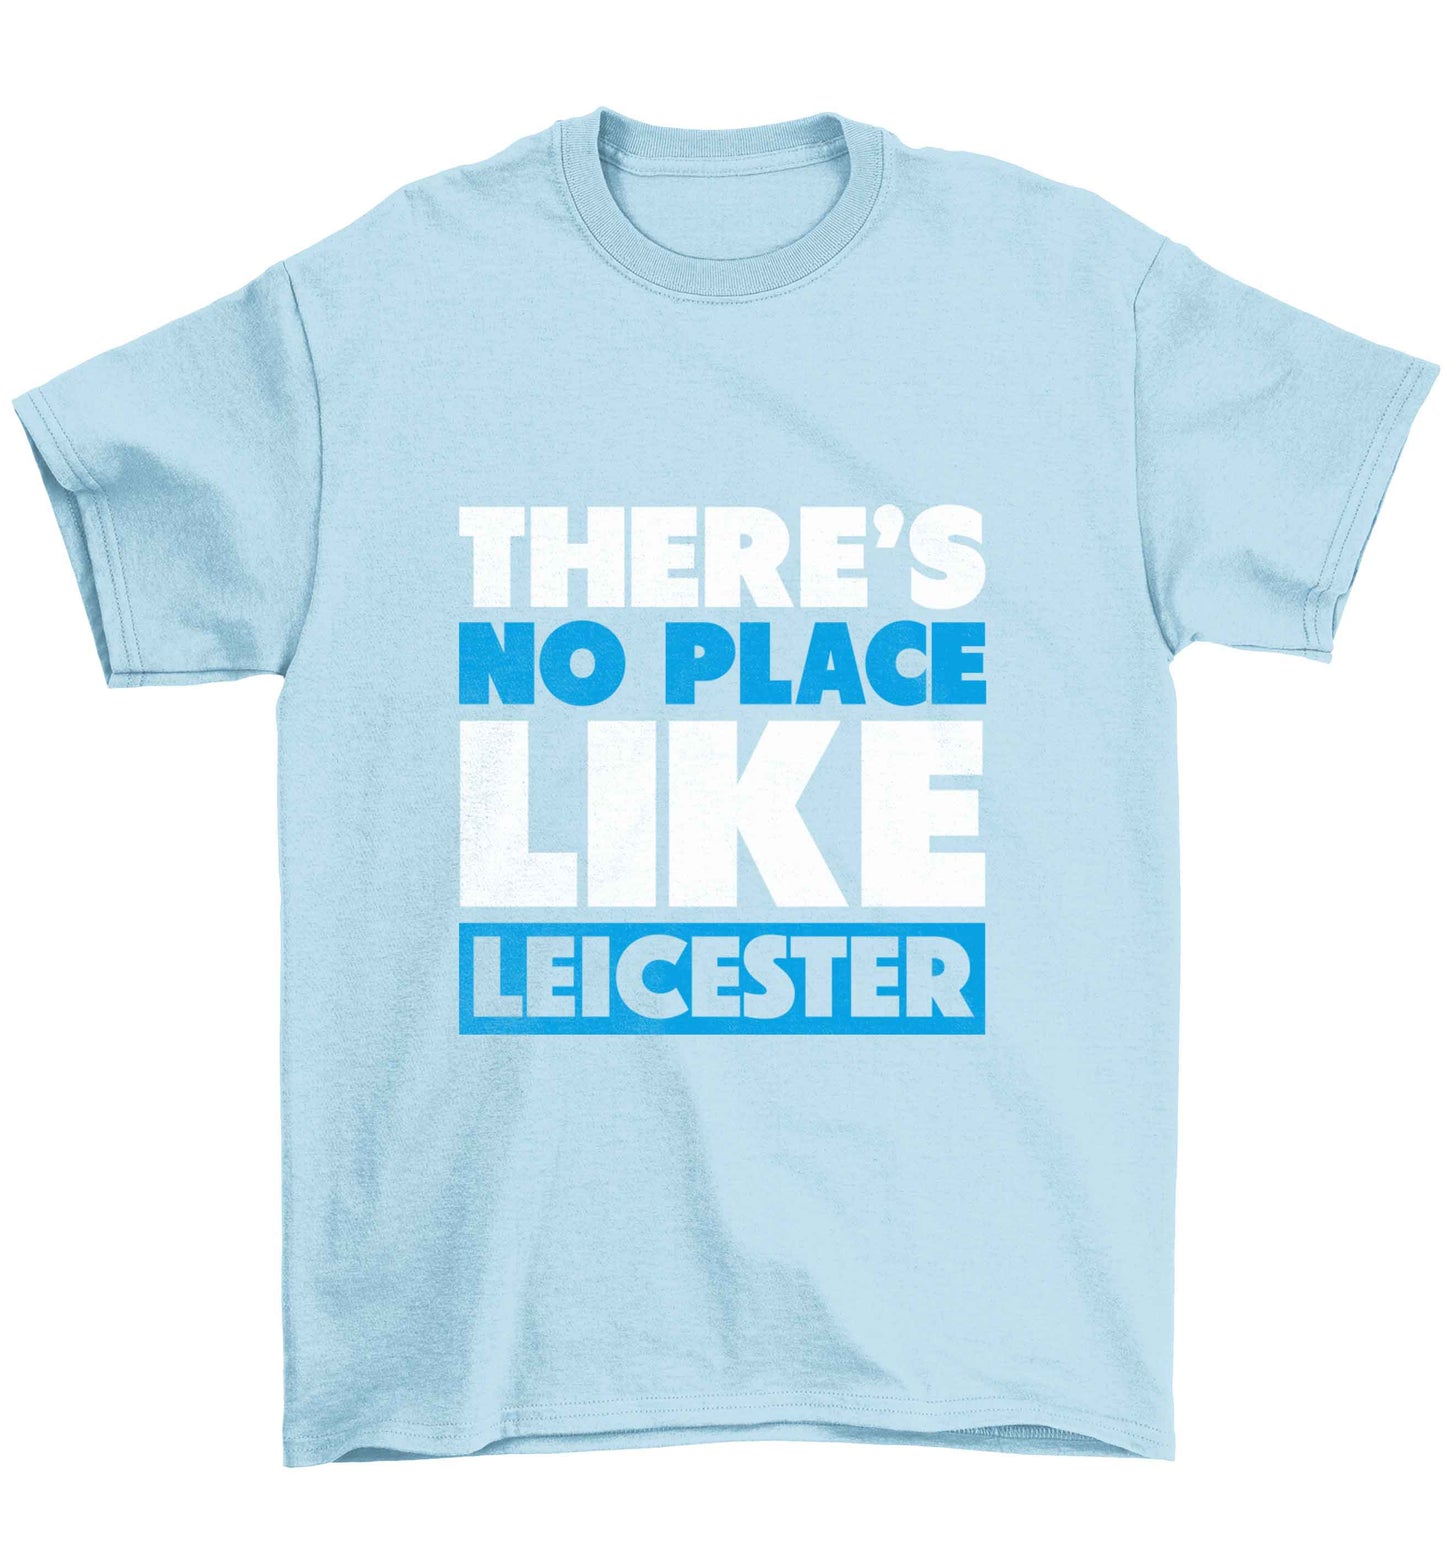 There's no place like Leicester Children's light blue Tshirt 12-13 Years